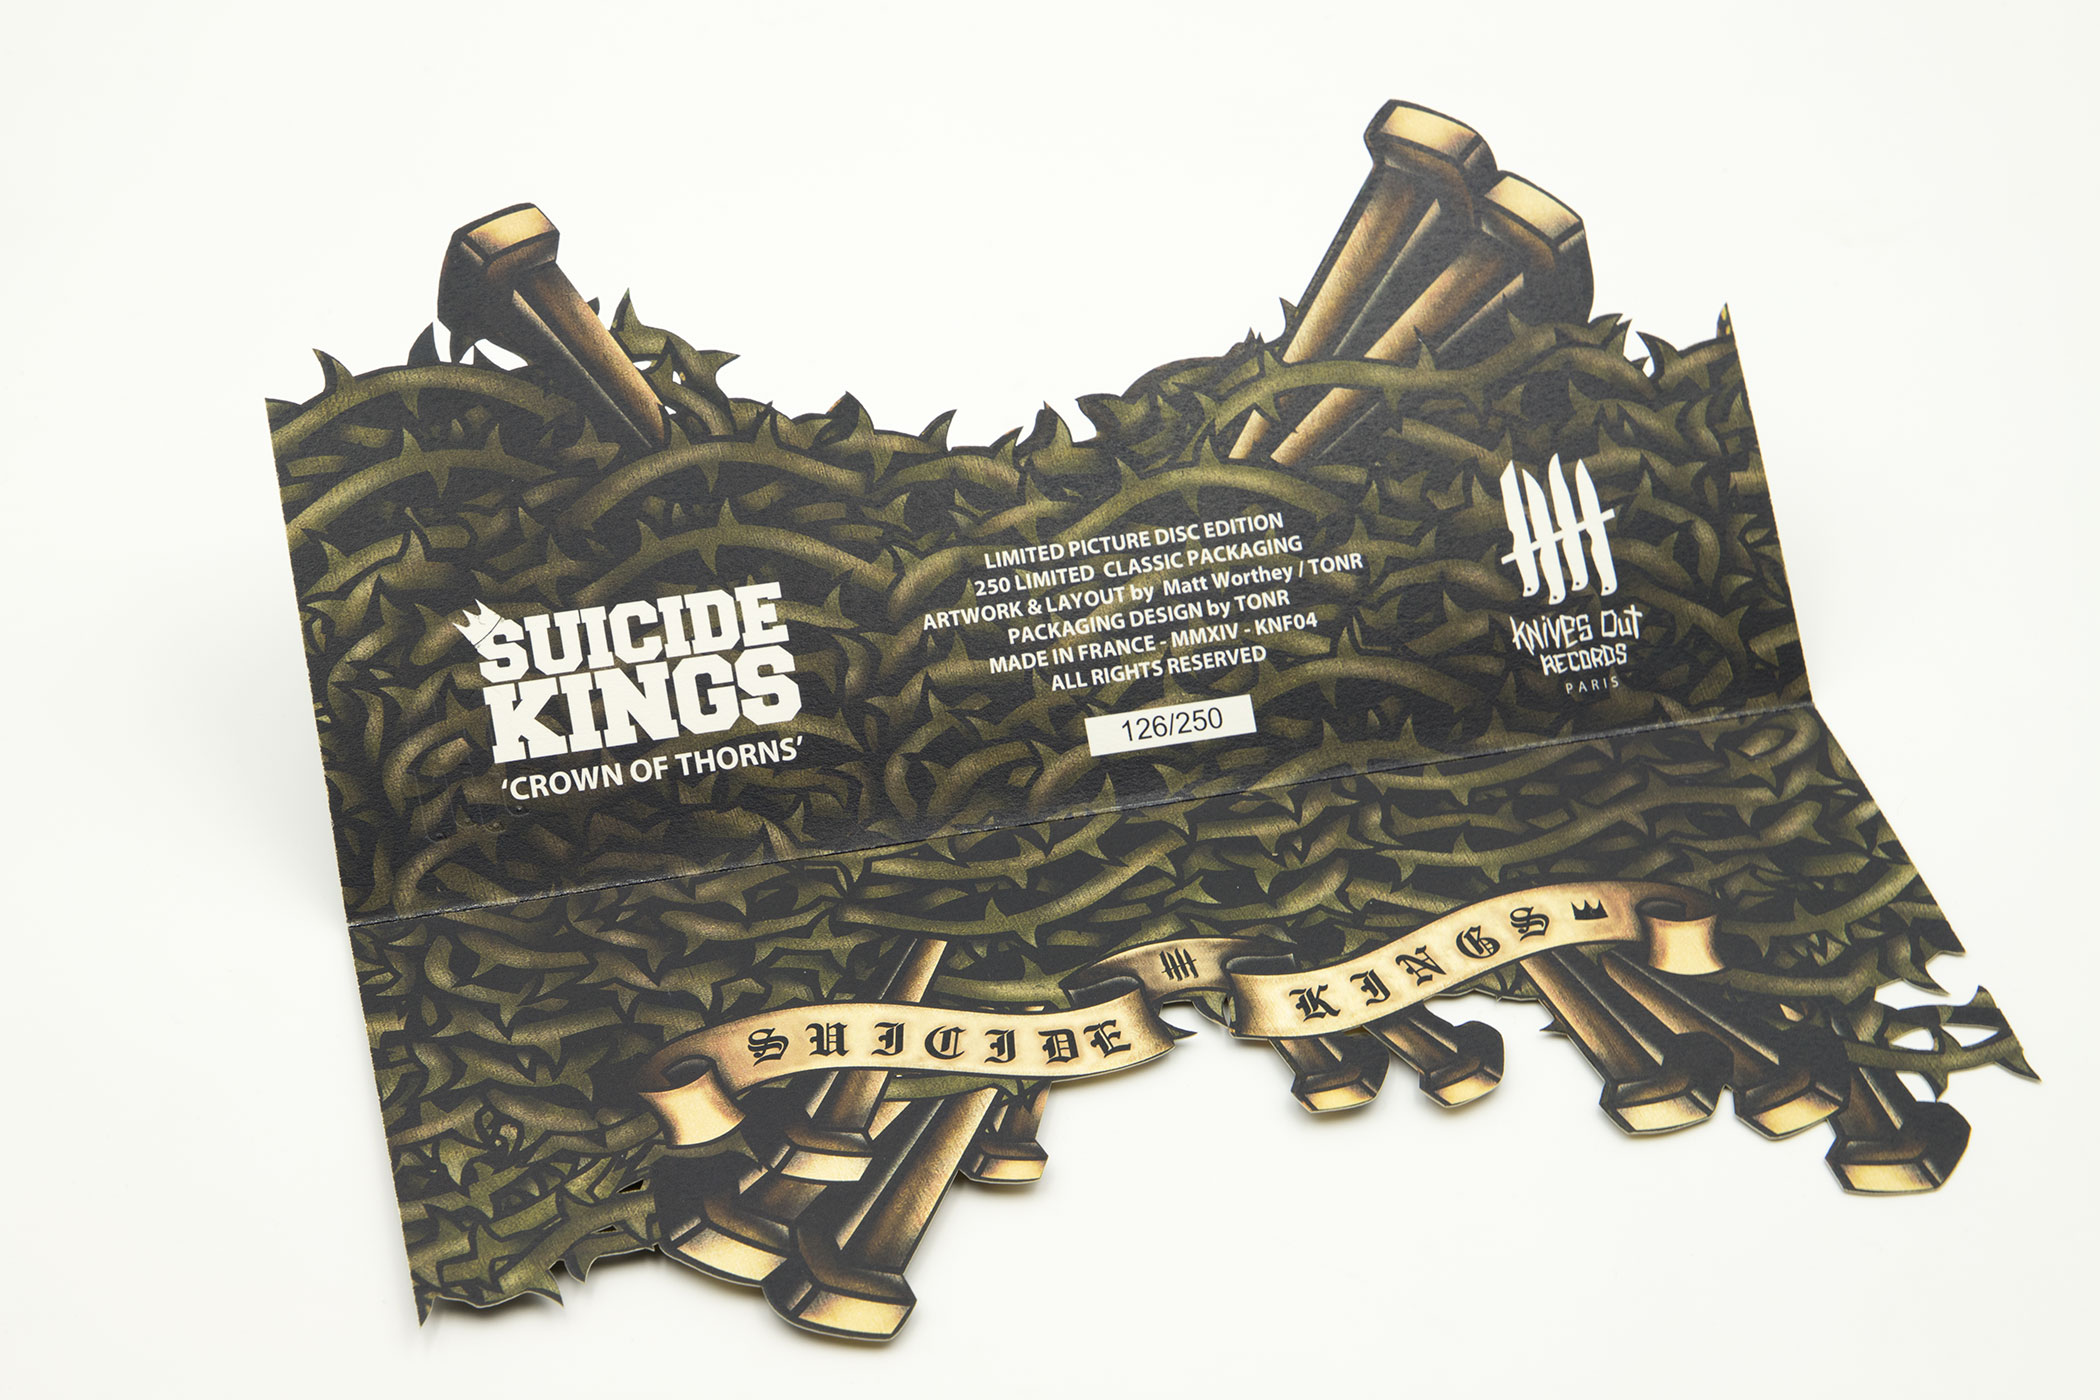 SUICIDE KINGS "Crown Of Thorns" 12" Picture Disc vinyl